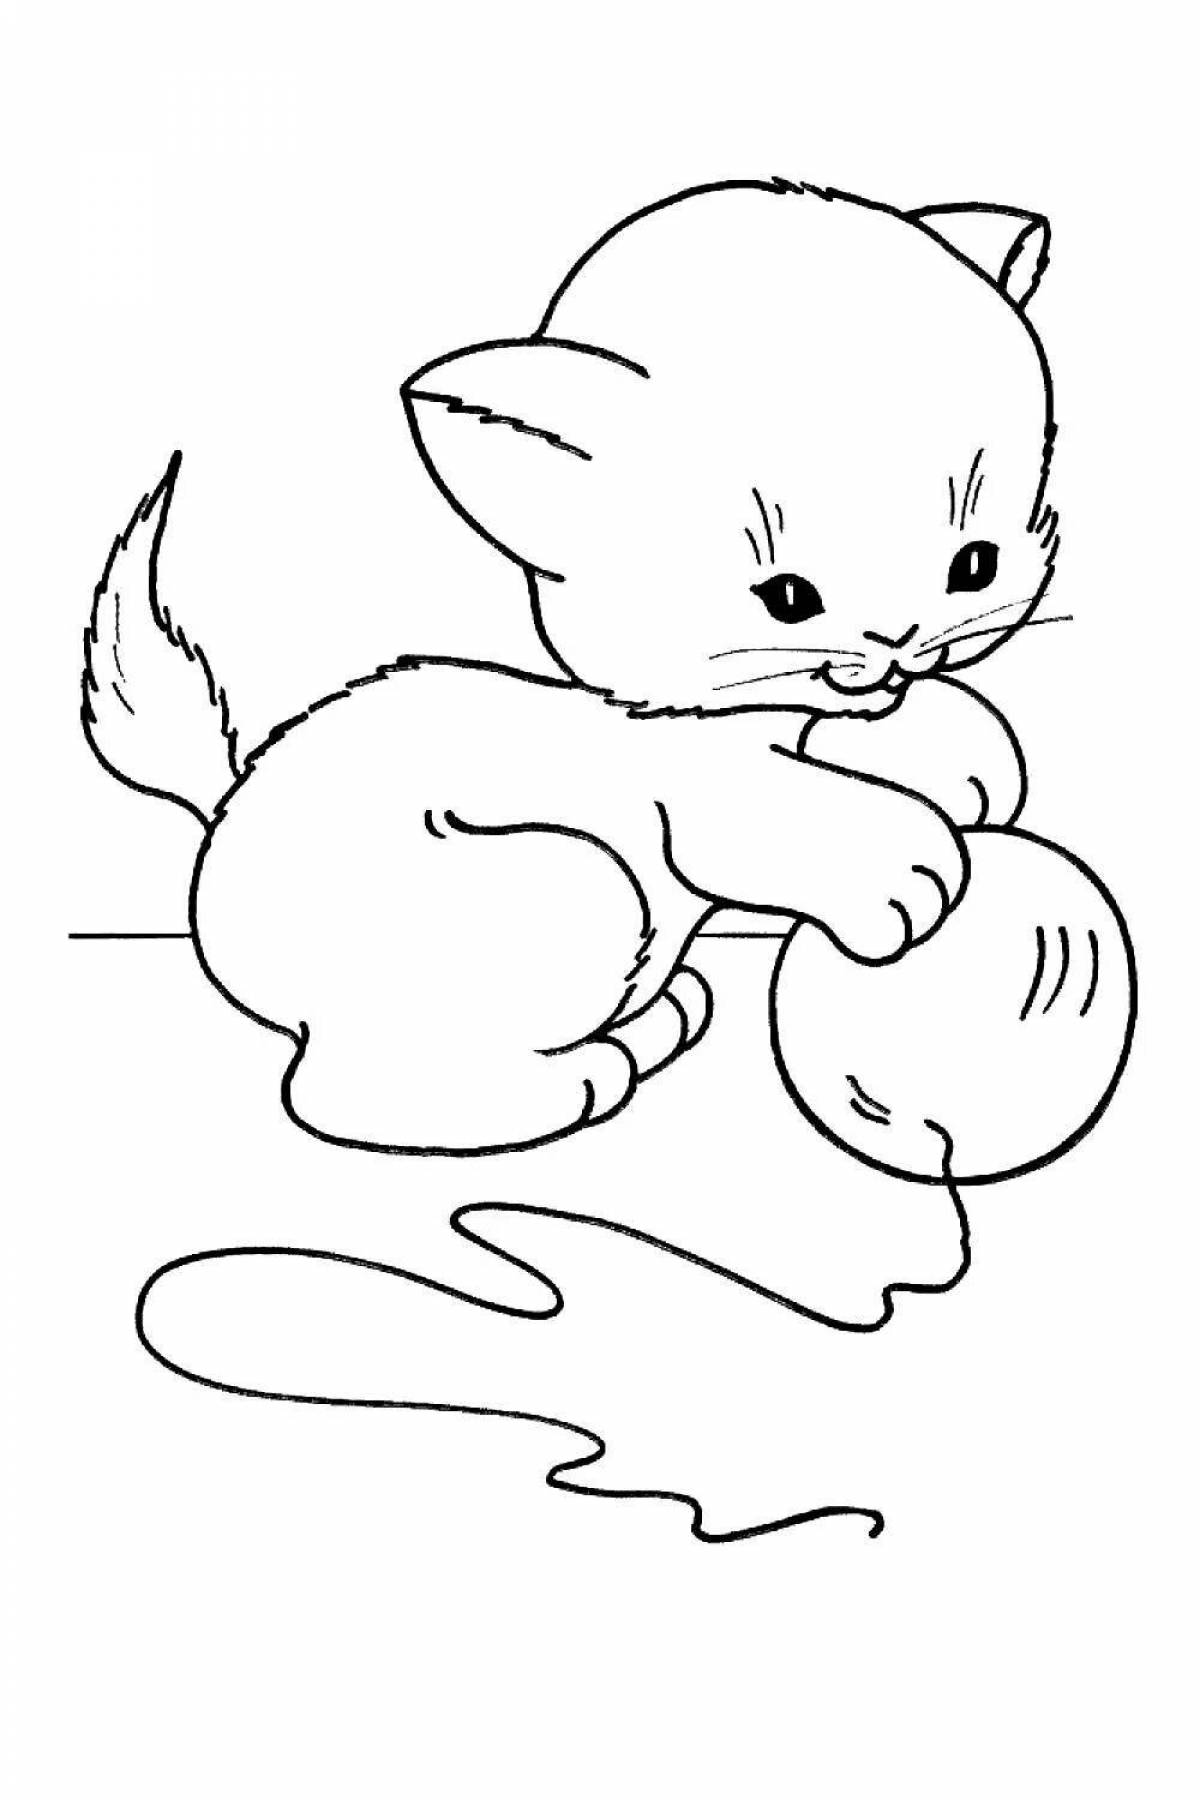 Coloring playful kitten with a ball